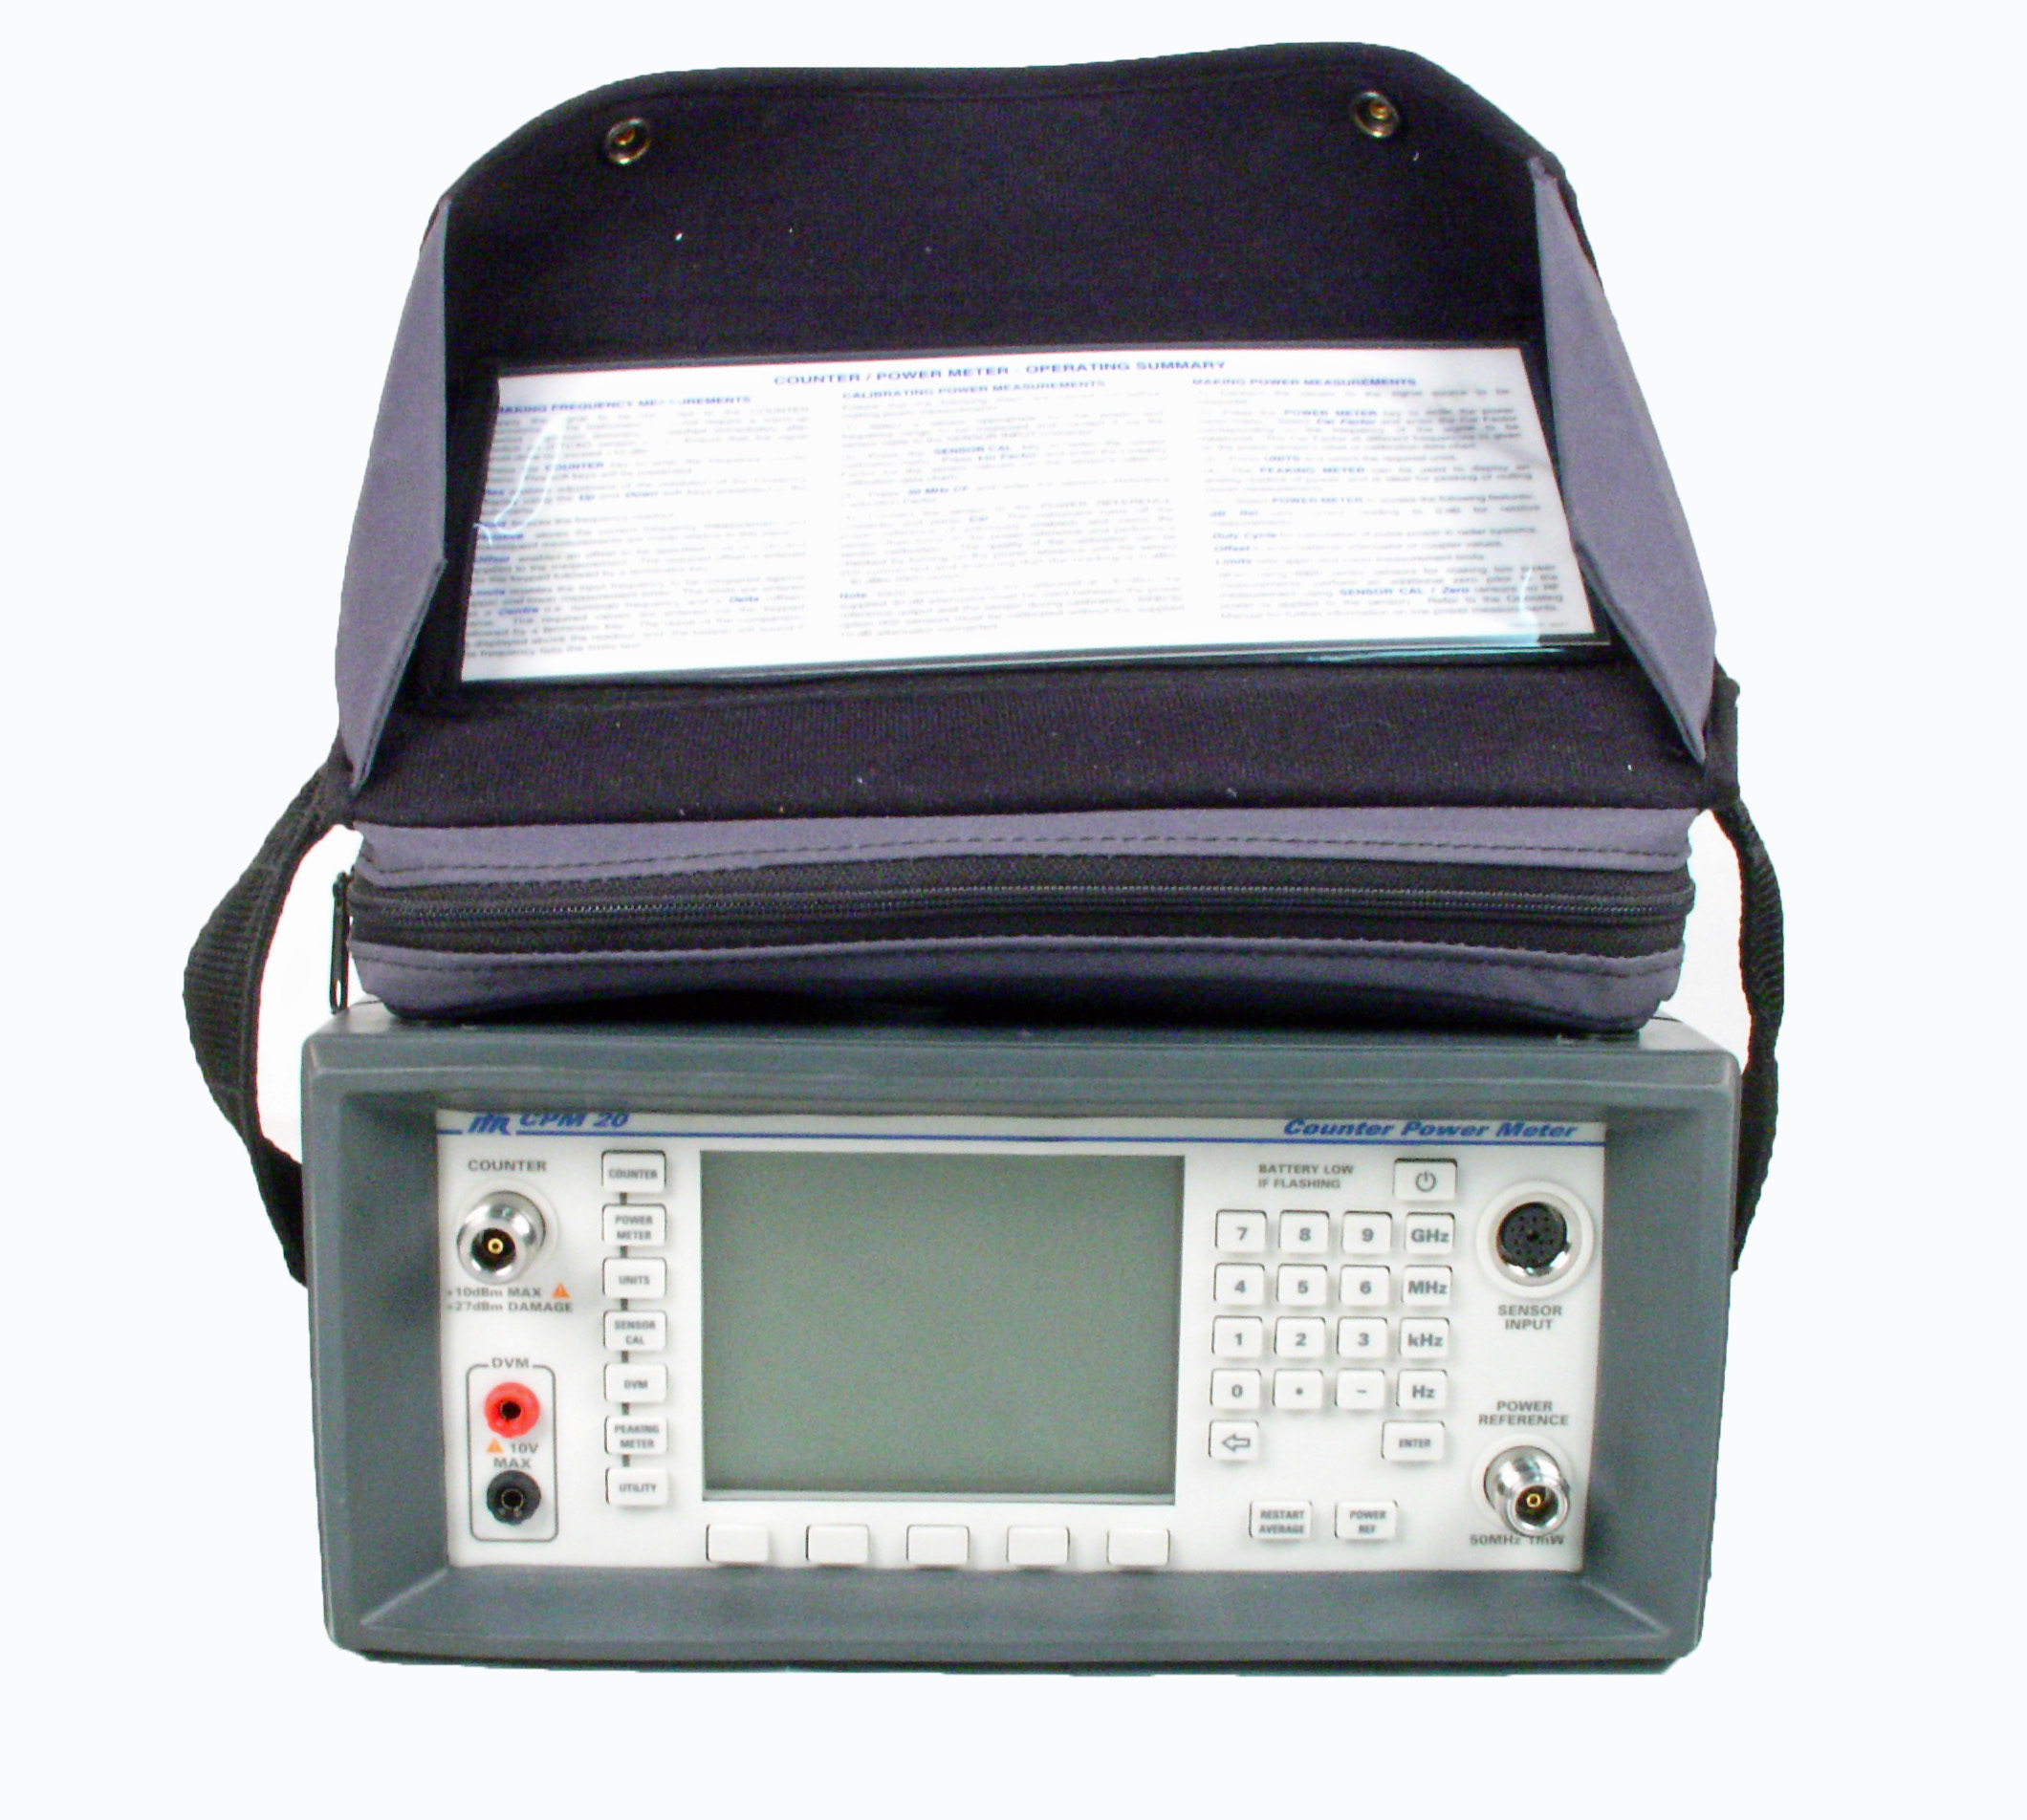 Similar product is IFR CPM20